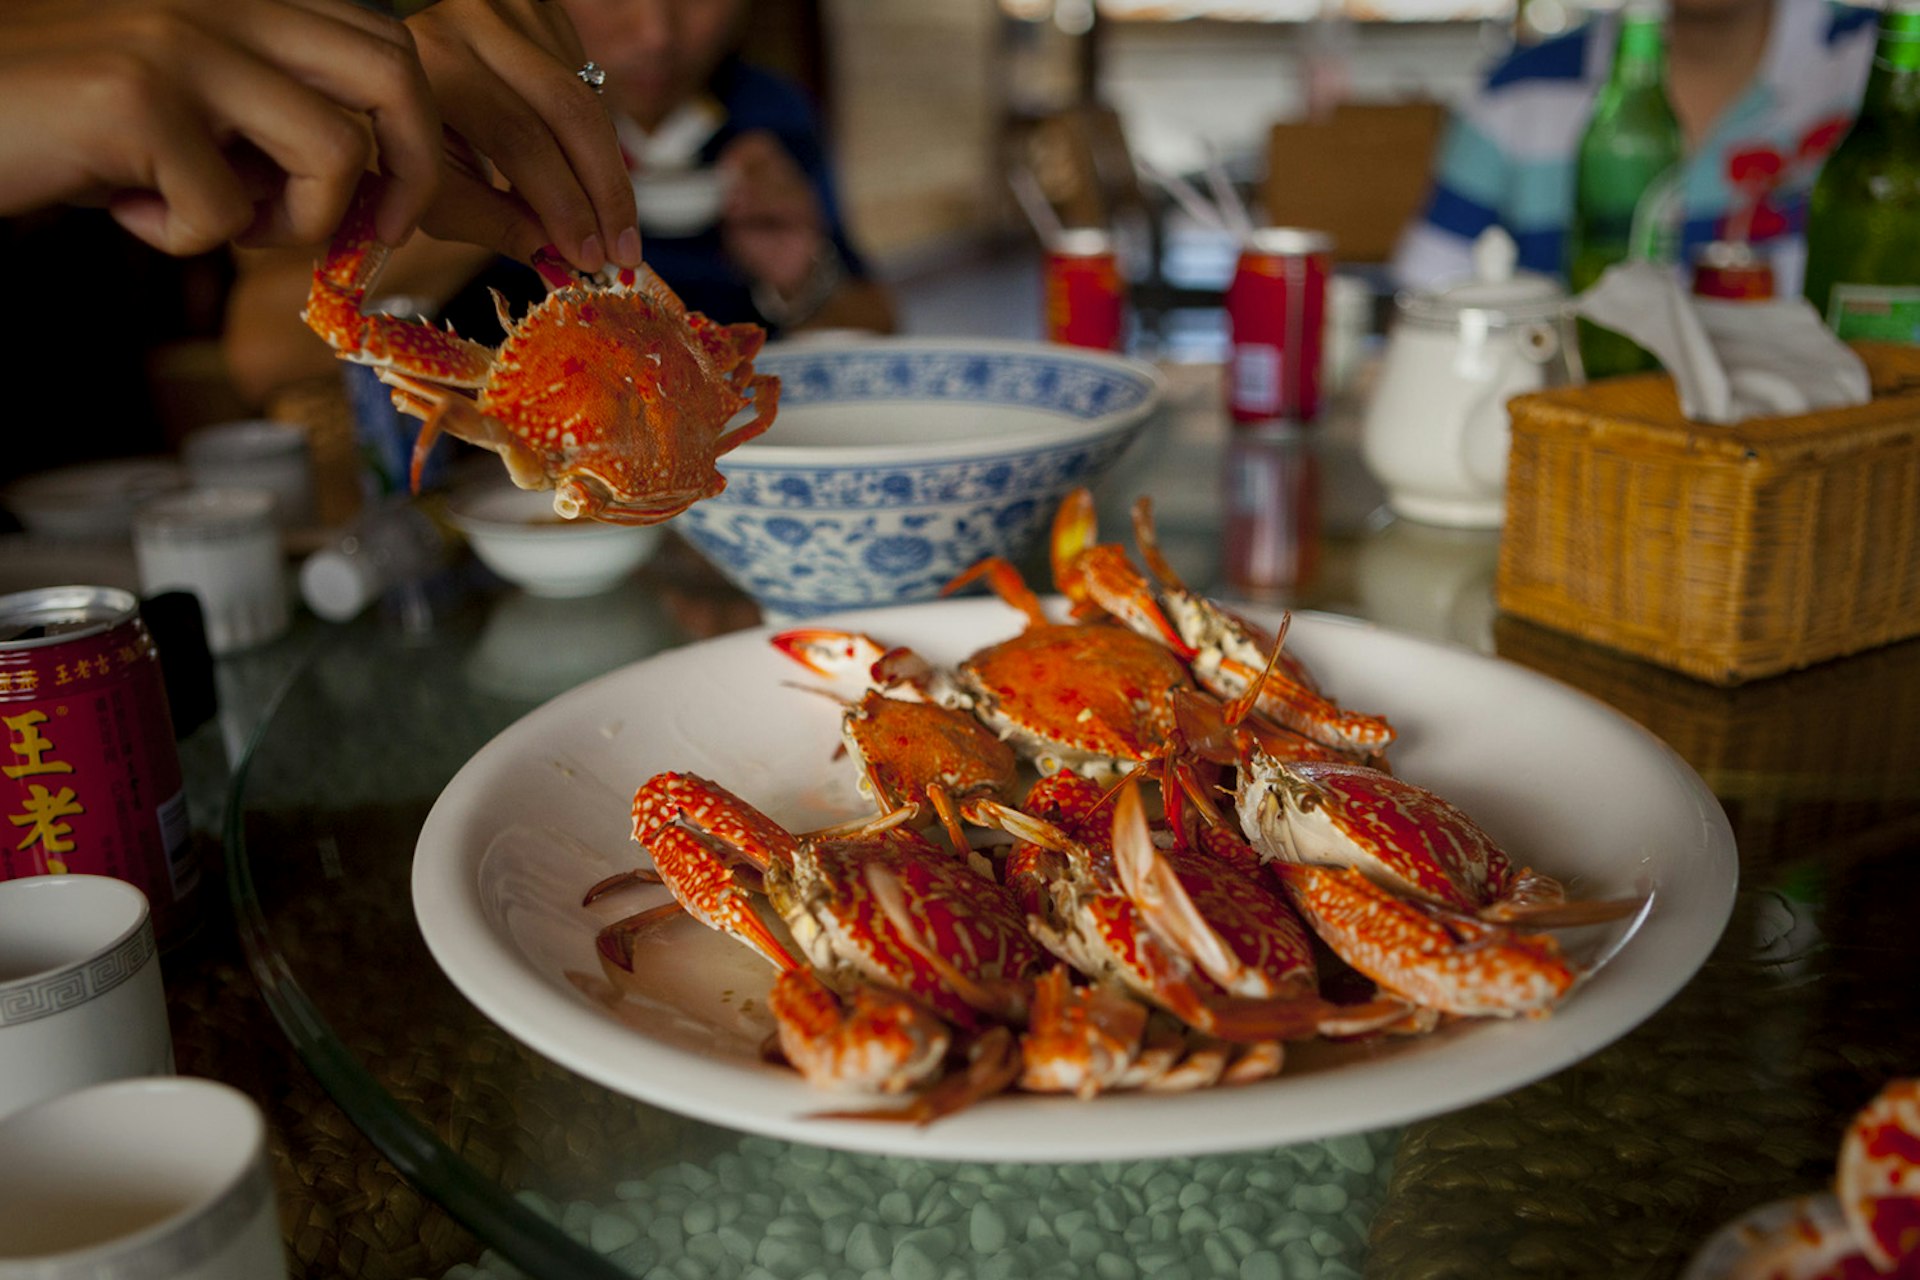 Fresh crabs at Haitang Bay Impression Seafood Restaurant. Image by Dora Whitaker / Lonely Planet